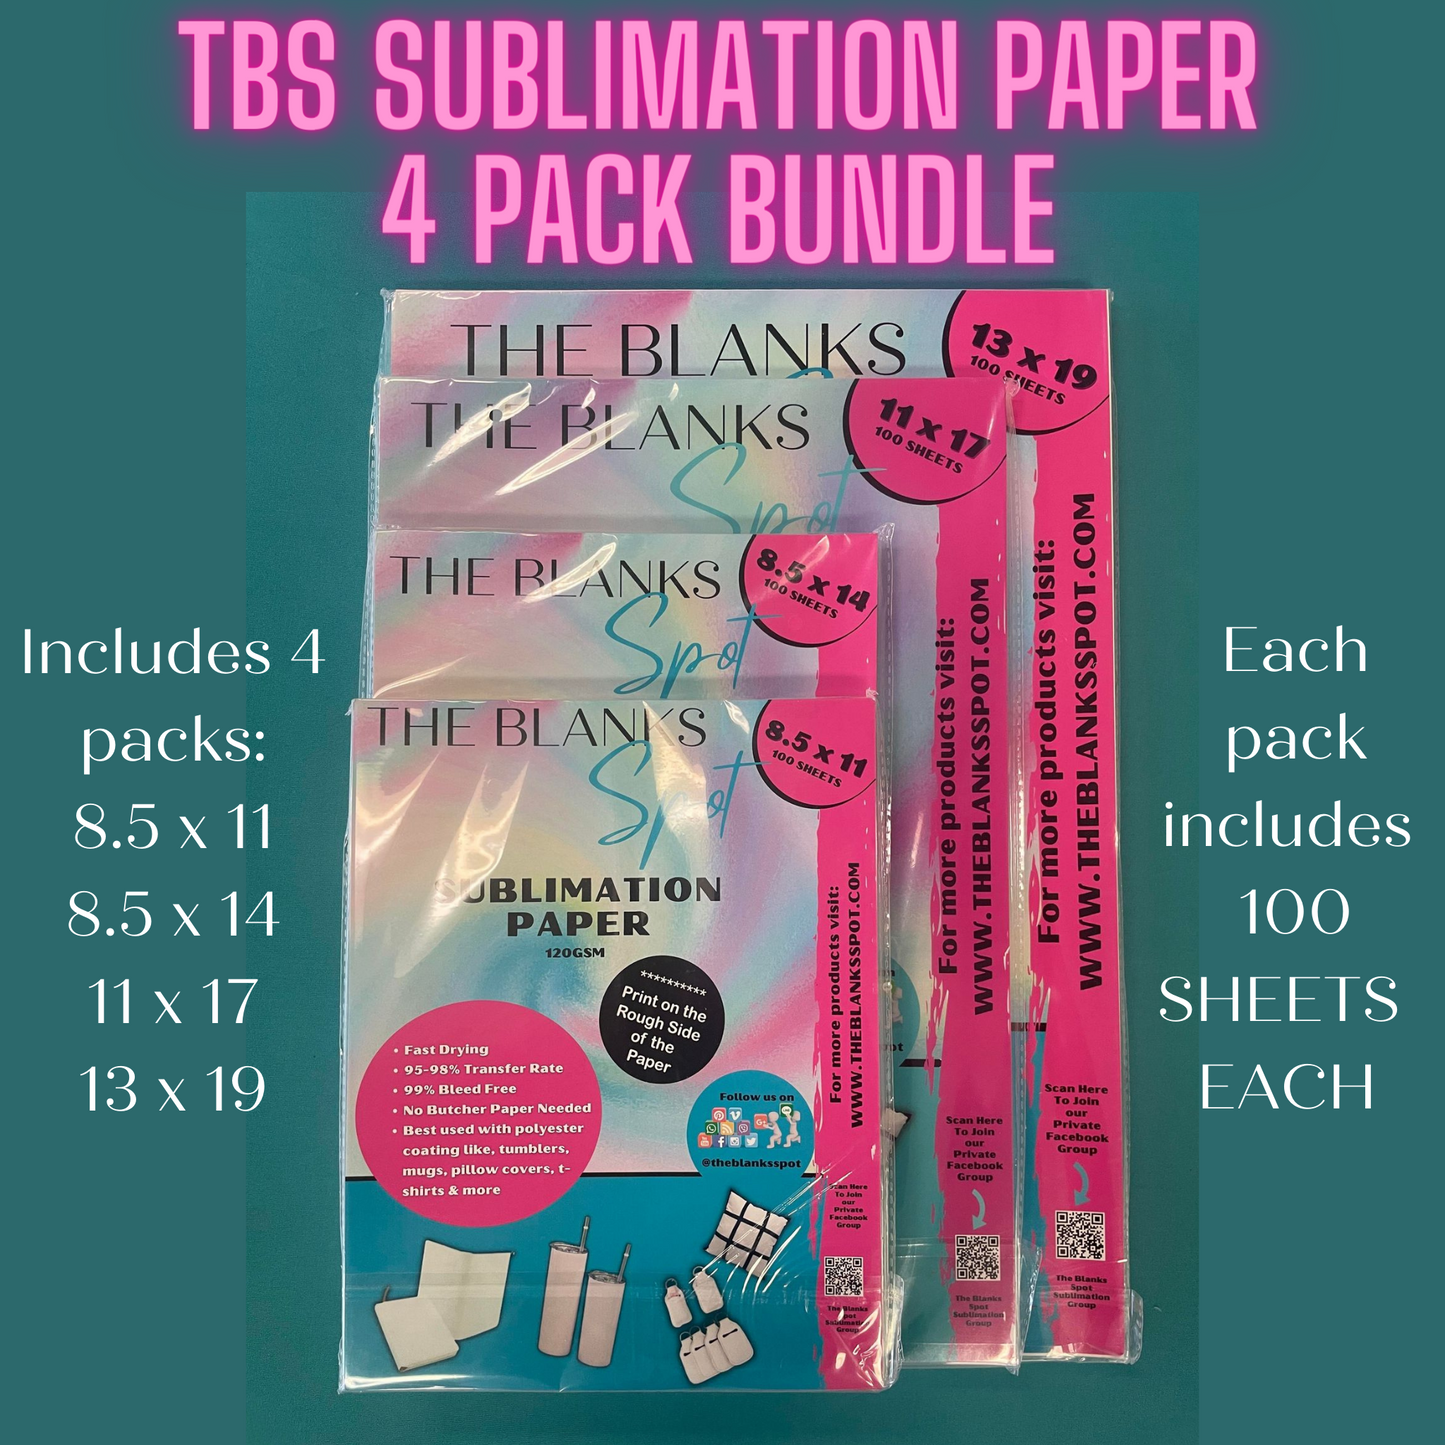 TBS SUBLIMATION PAPER 4 PACK BUNDLE (1 Full Pack Each Size)